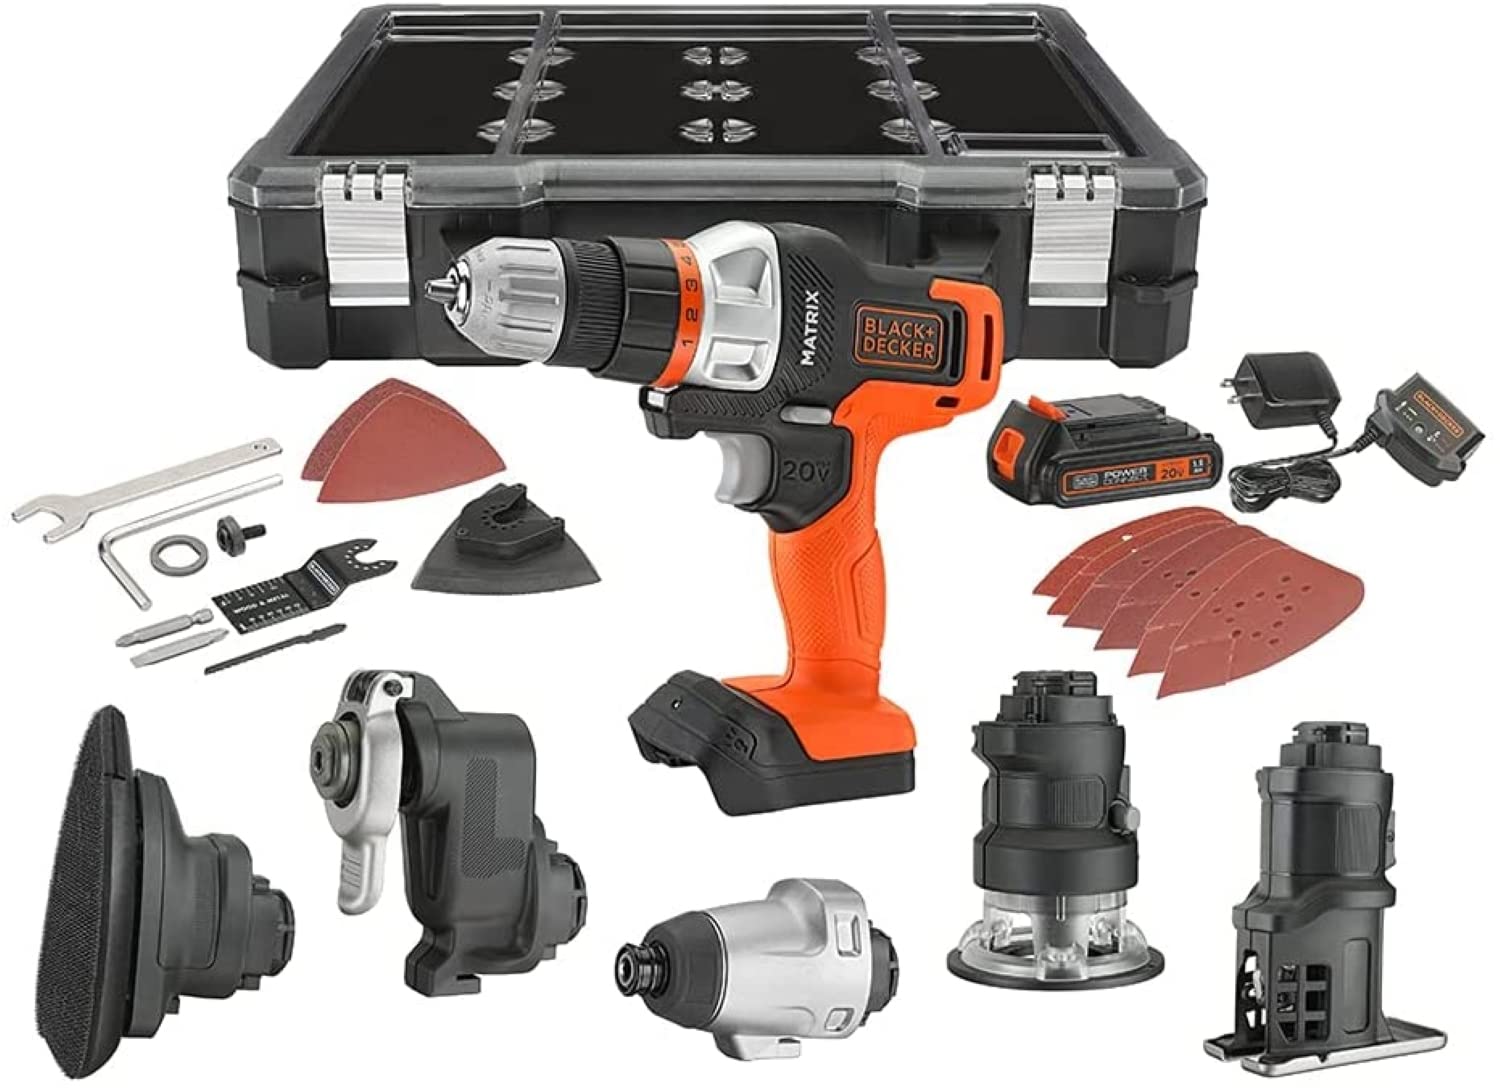 How to Choose a Cordless Tool Set That Covers a Range of Household Tasks?